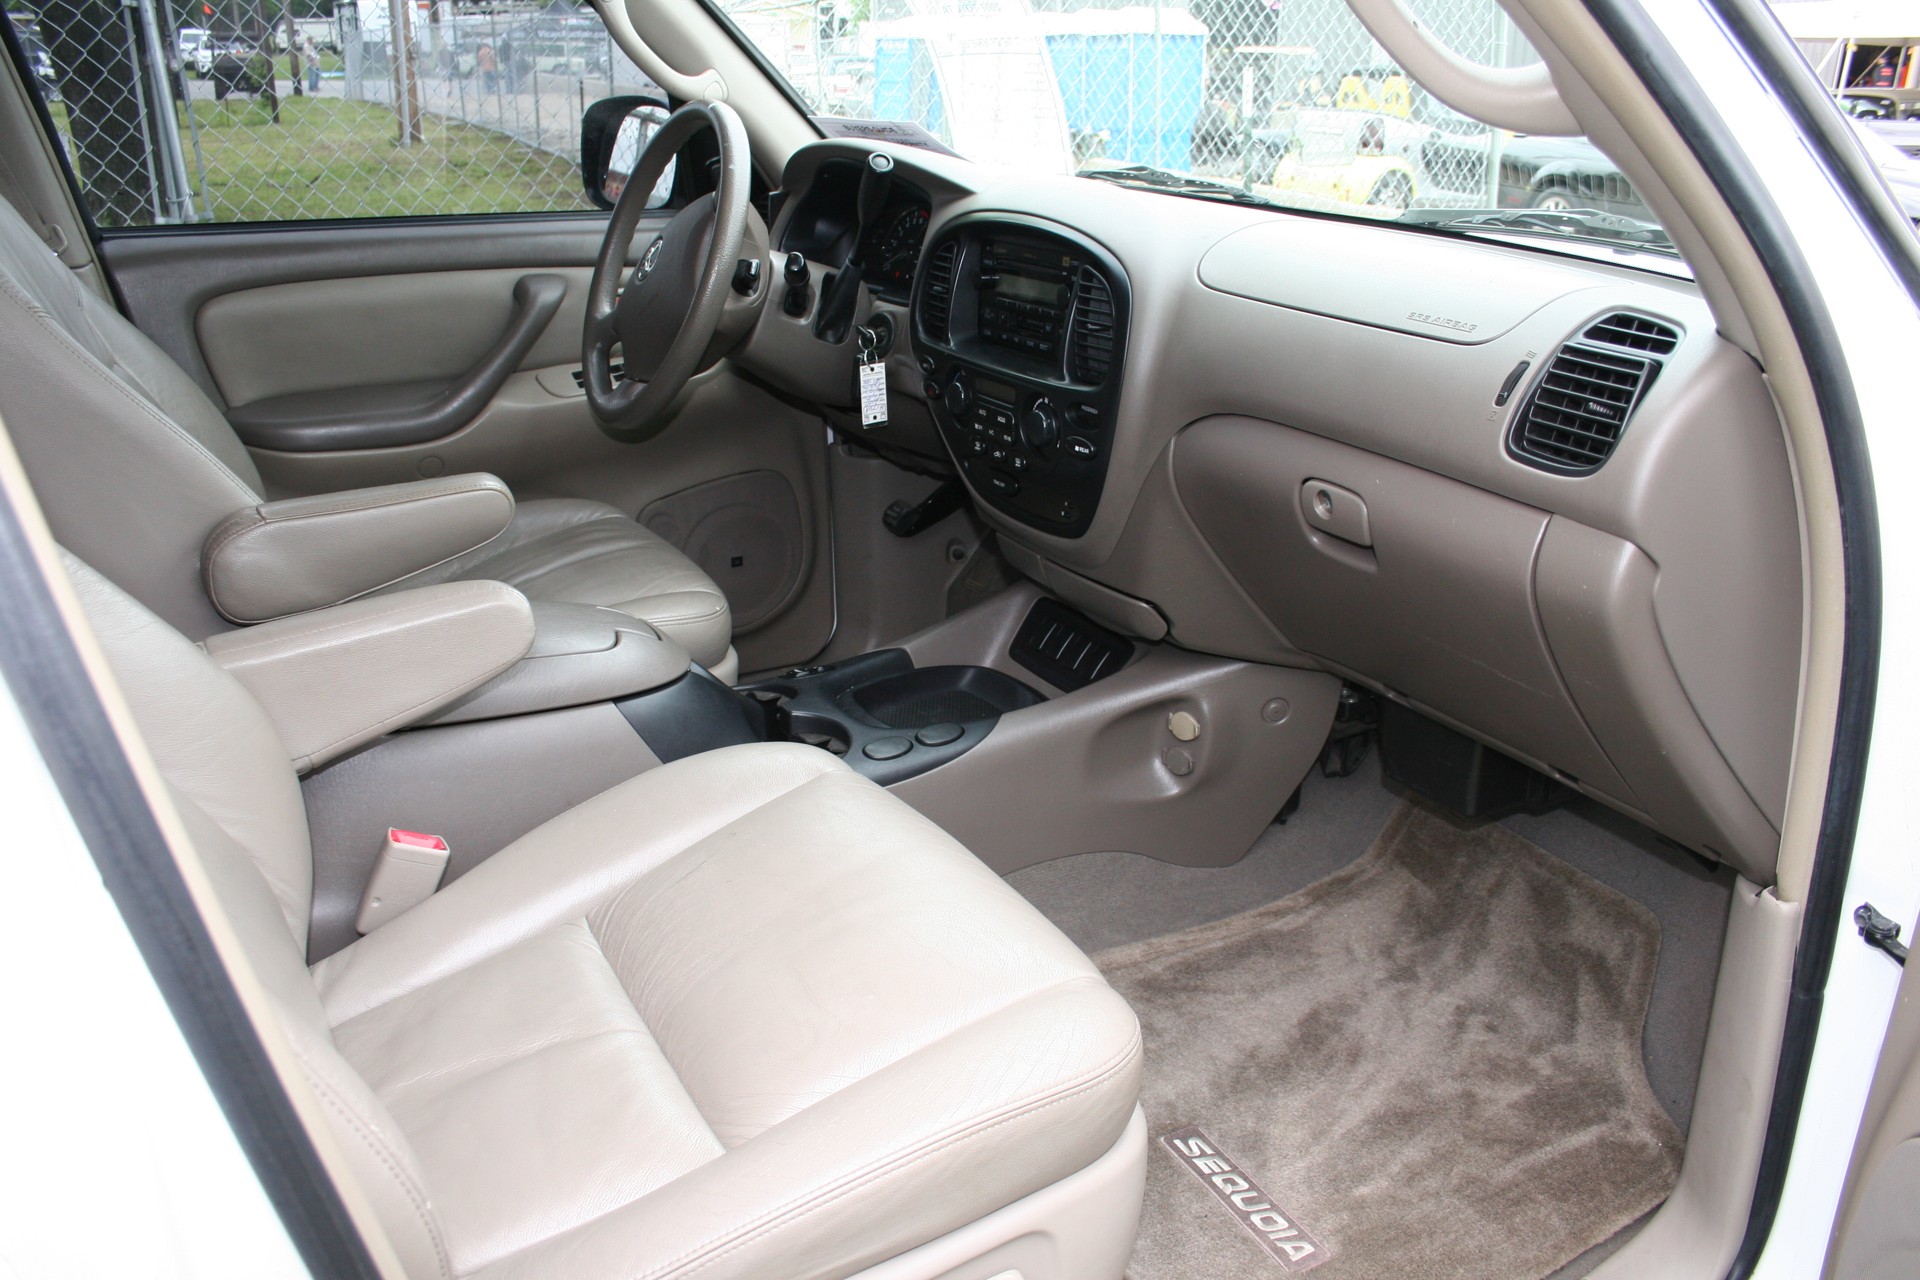 7th Image of a 2007 TOYOTA SEQUOIA